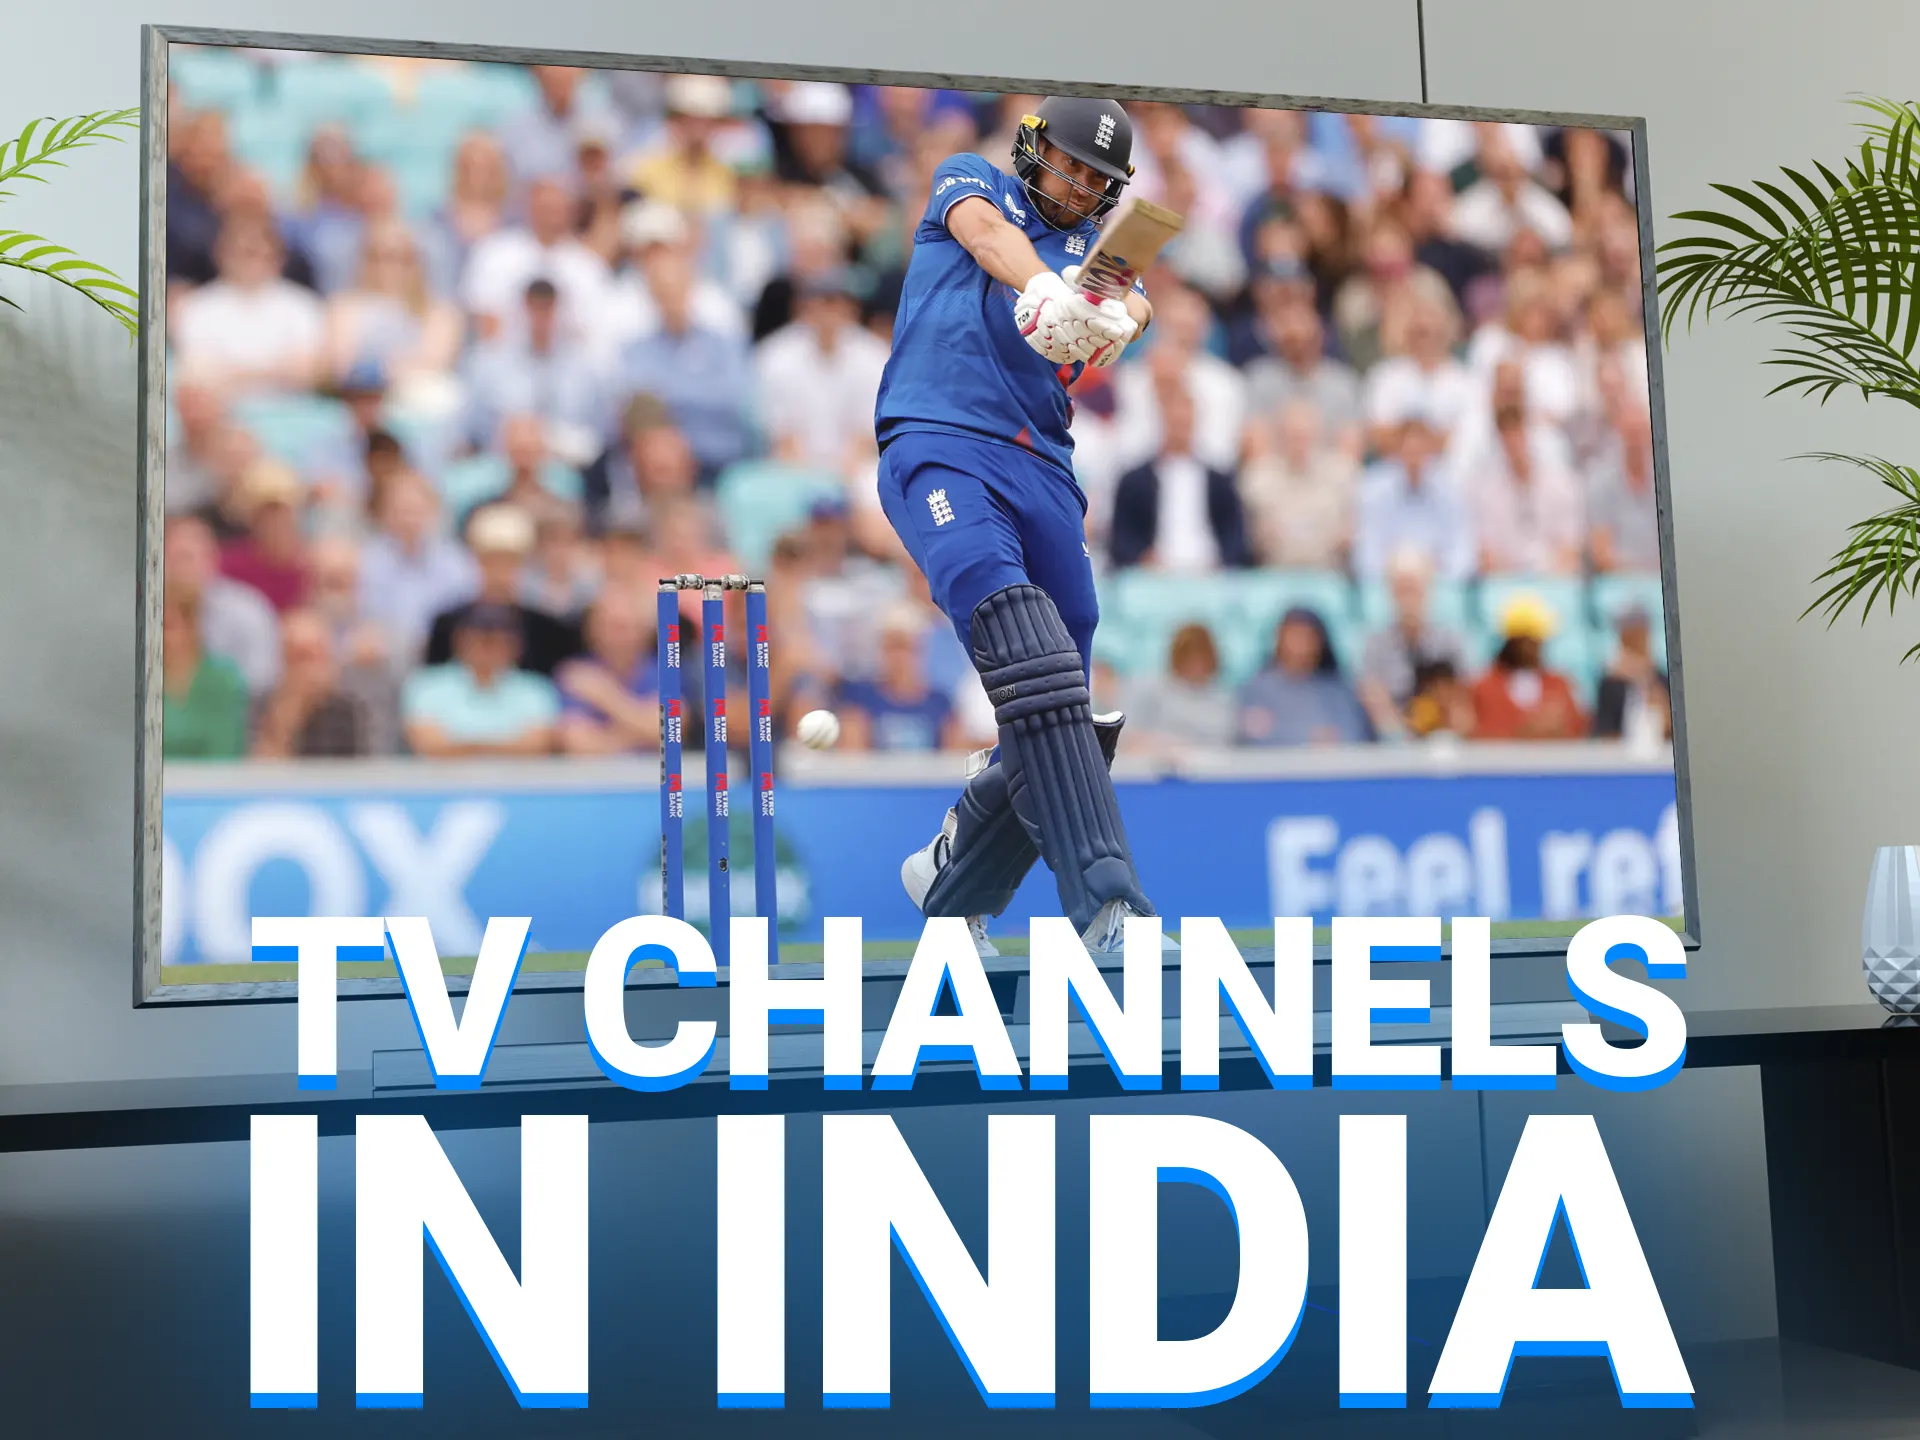 Check out the list of most popular TV channels in India to watch cricket tournaments.